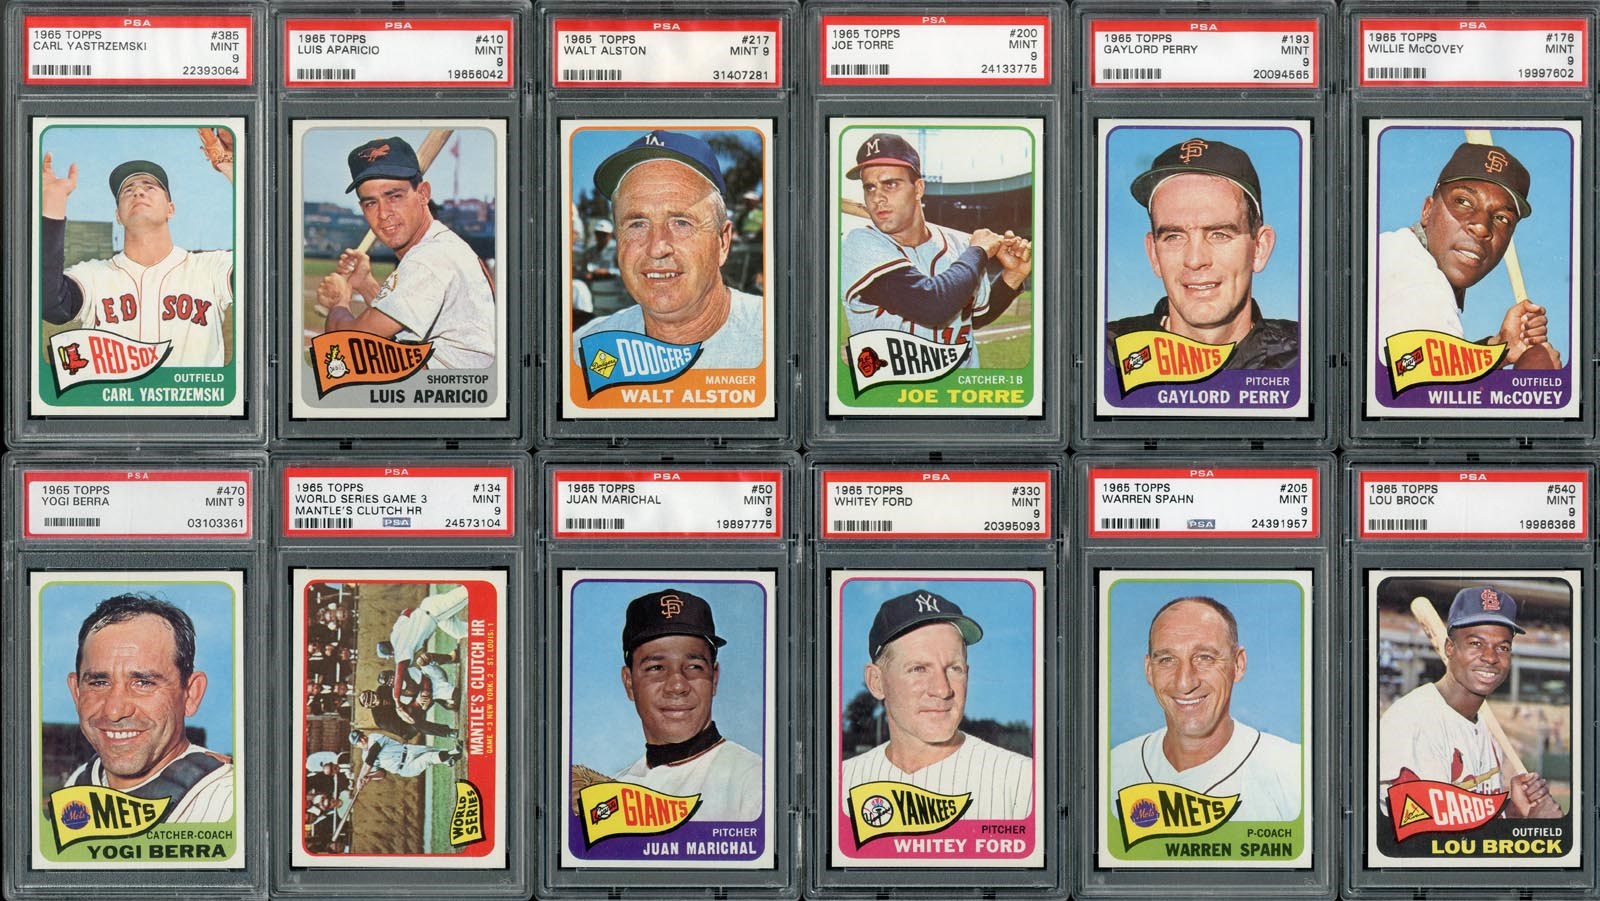 Baseball and Trading Cards - 1965 Topps Hall of Famer PSA MINT 9 Collection (12)